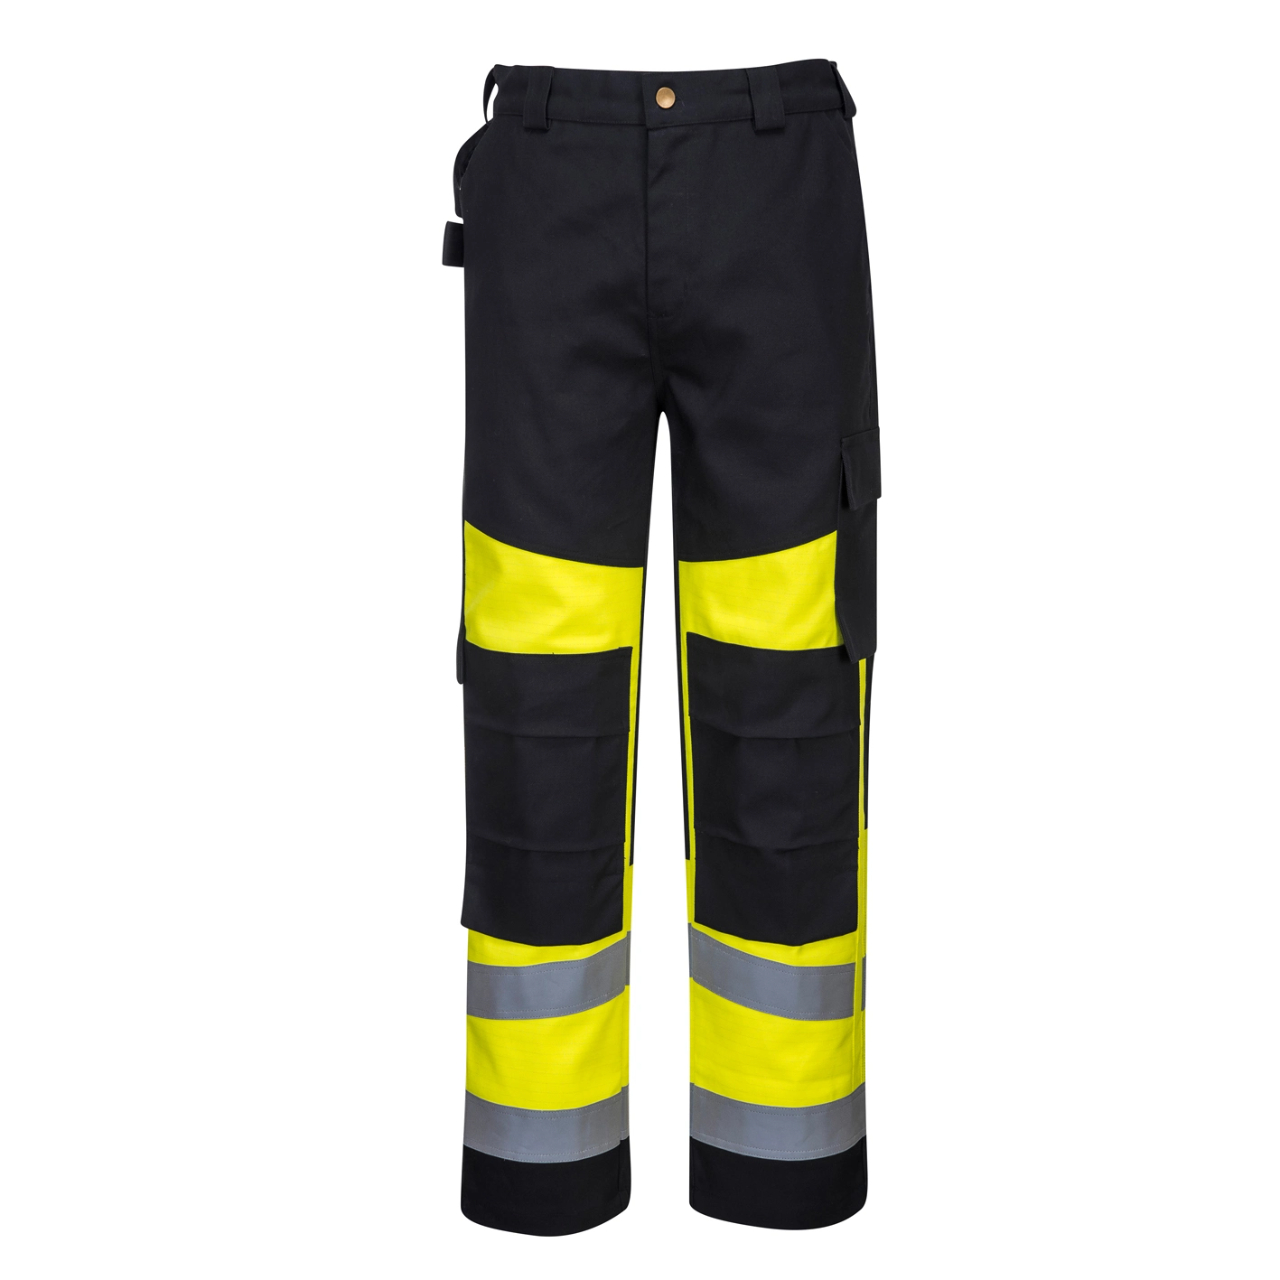 Safety Traffic Work Protective Pant